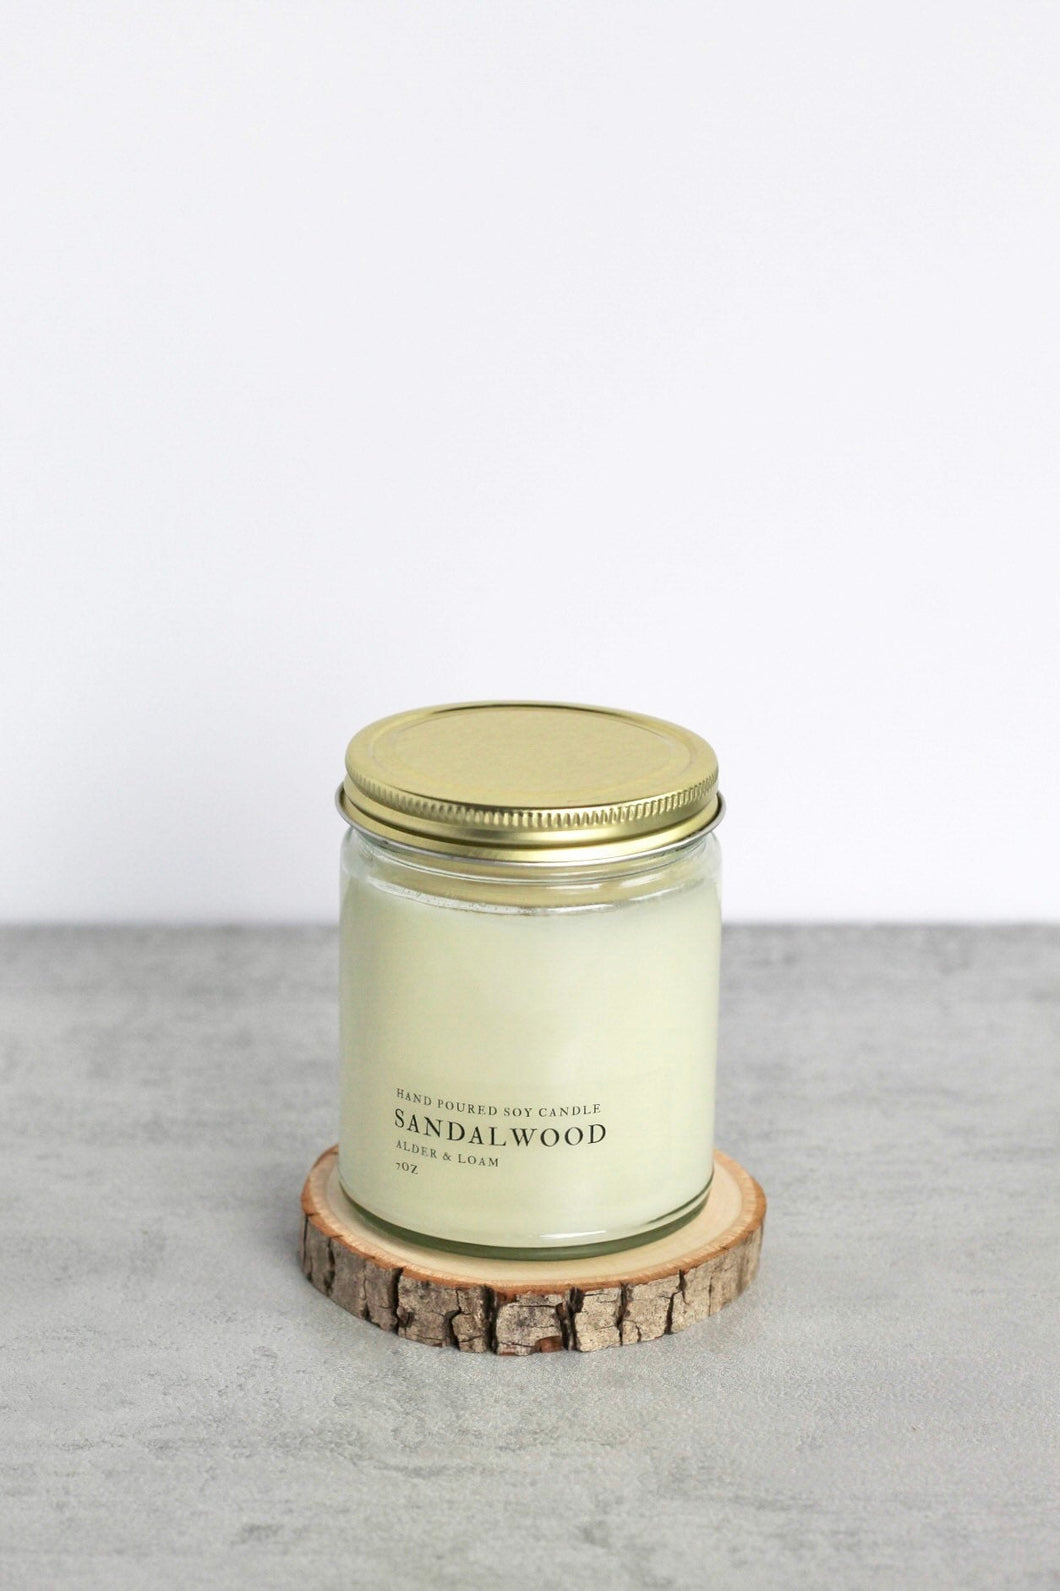 Sandalwood Soy Candle, Hand Poured, Natural, Eco Friendly, Earthy Scent, 7 oz Jar